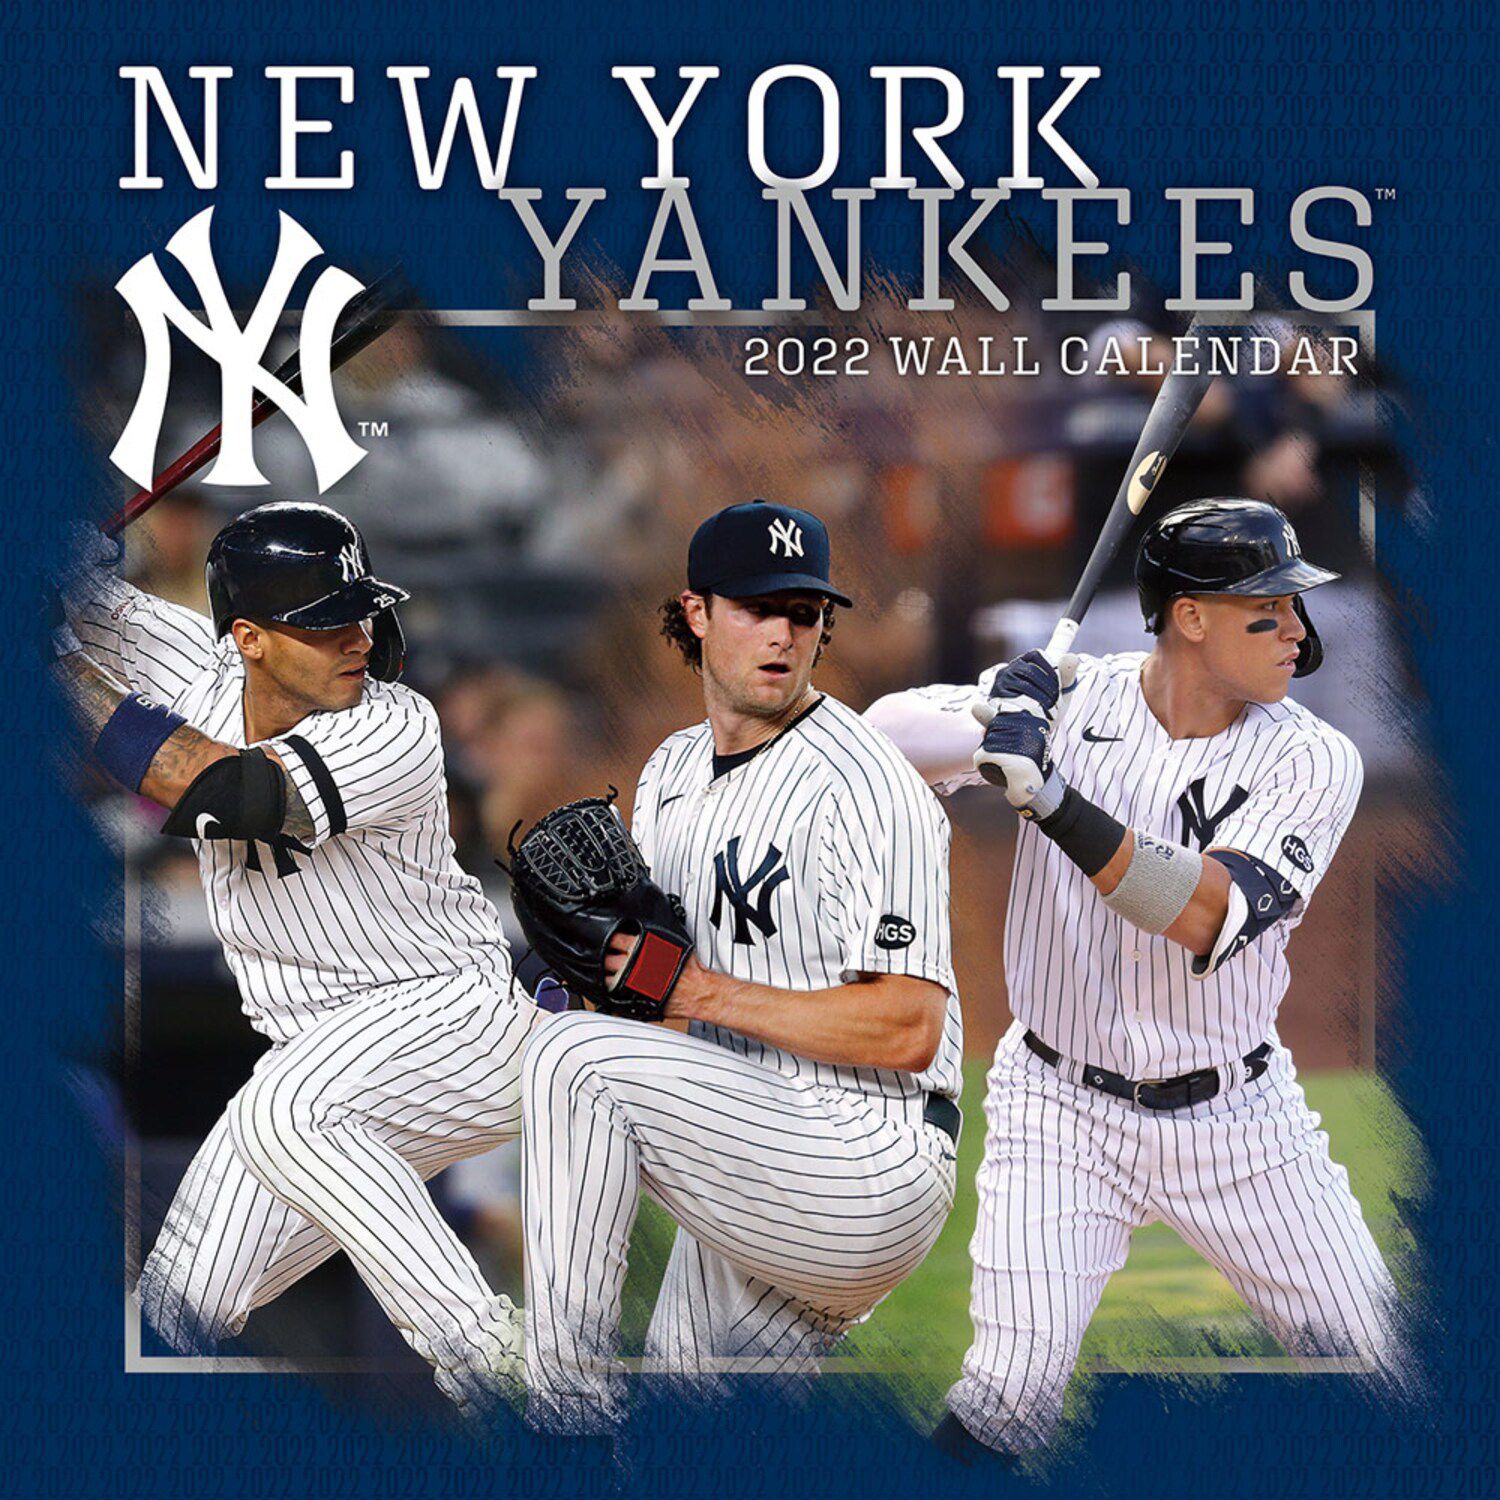 Image for Unbranded New York Yankees 2022 Wall Calendar at Kohl's.